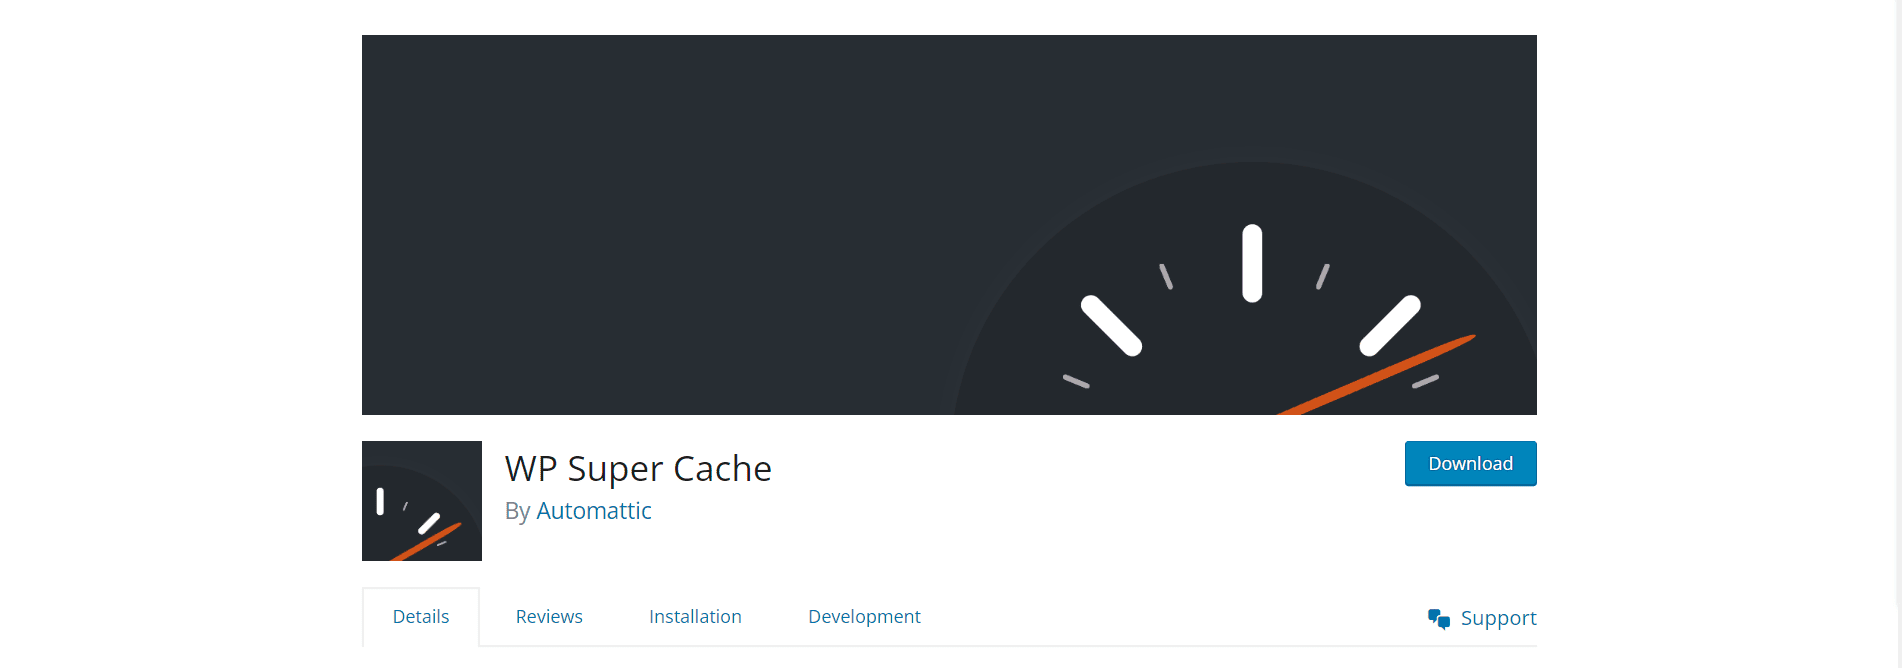 WP Super Cache plugin listing on WordPress, with the developer's name Automattic, featuring a speedometer graphic and a download button, signifying site performance improvement.